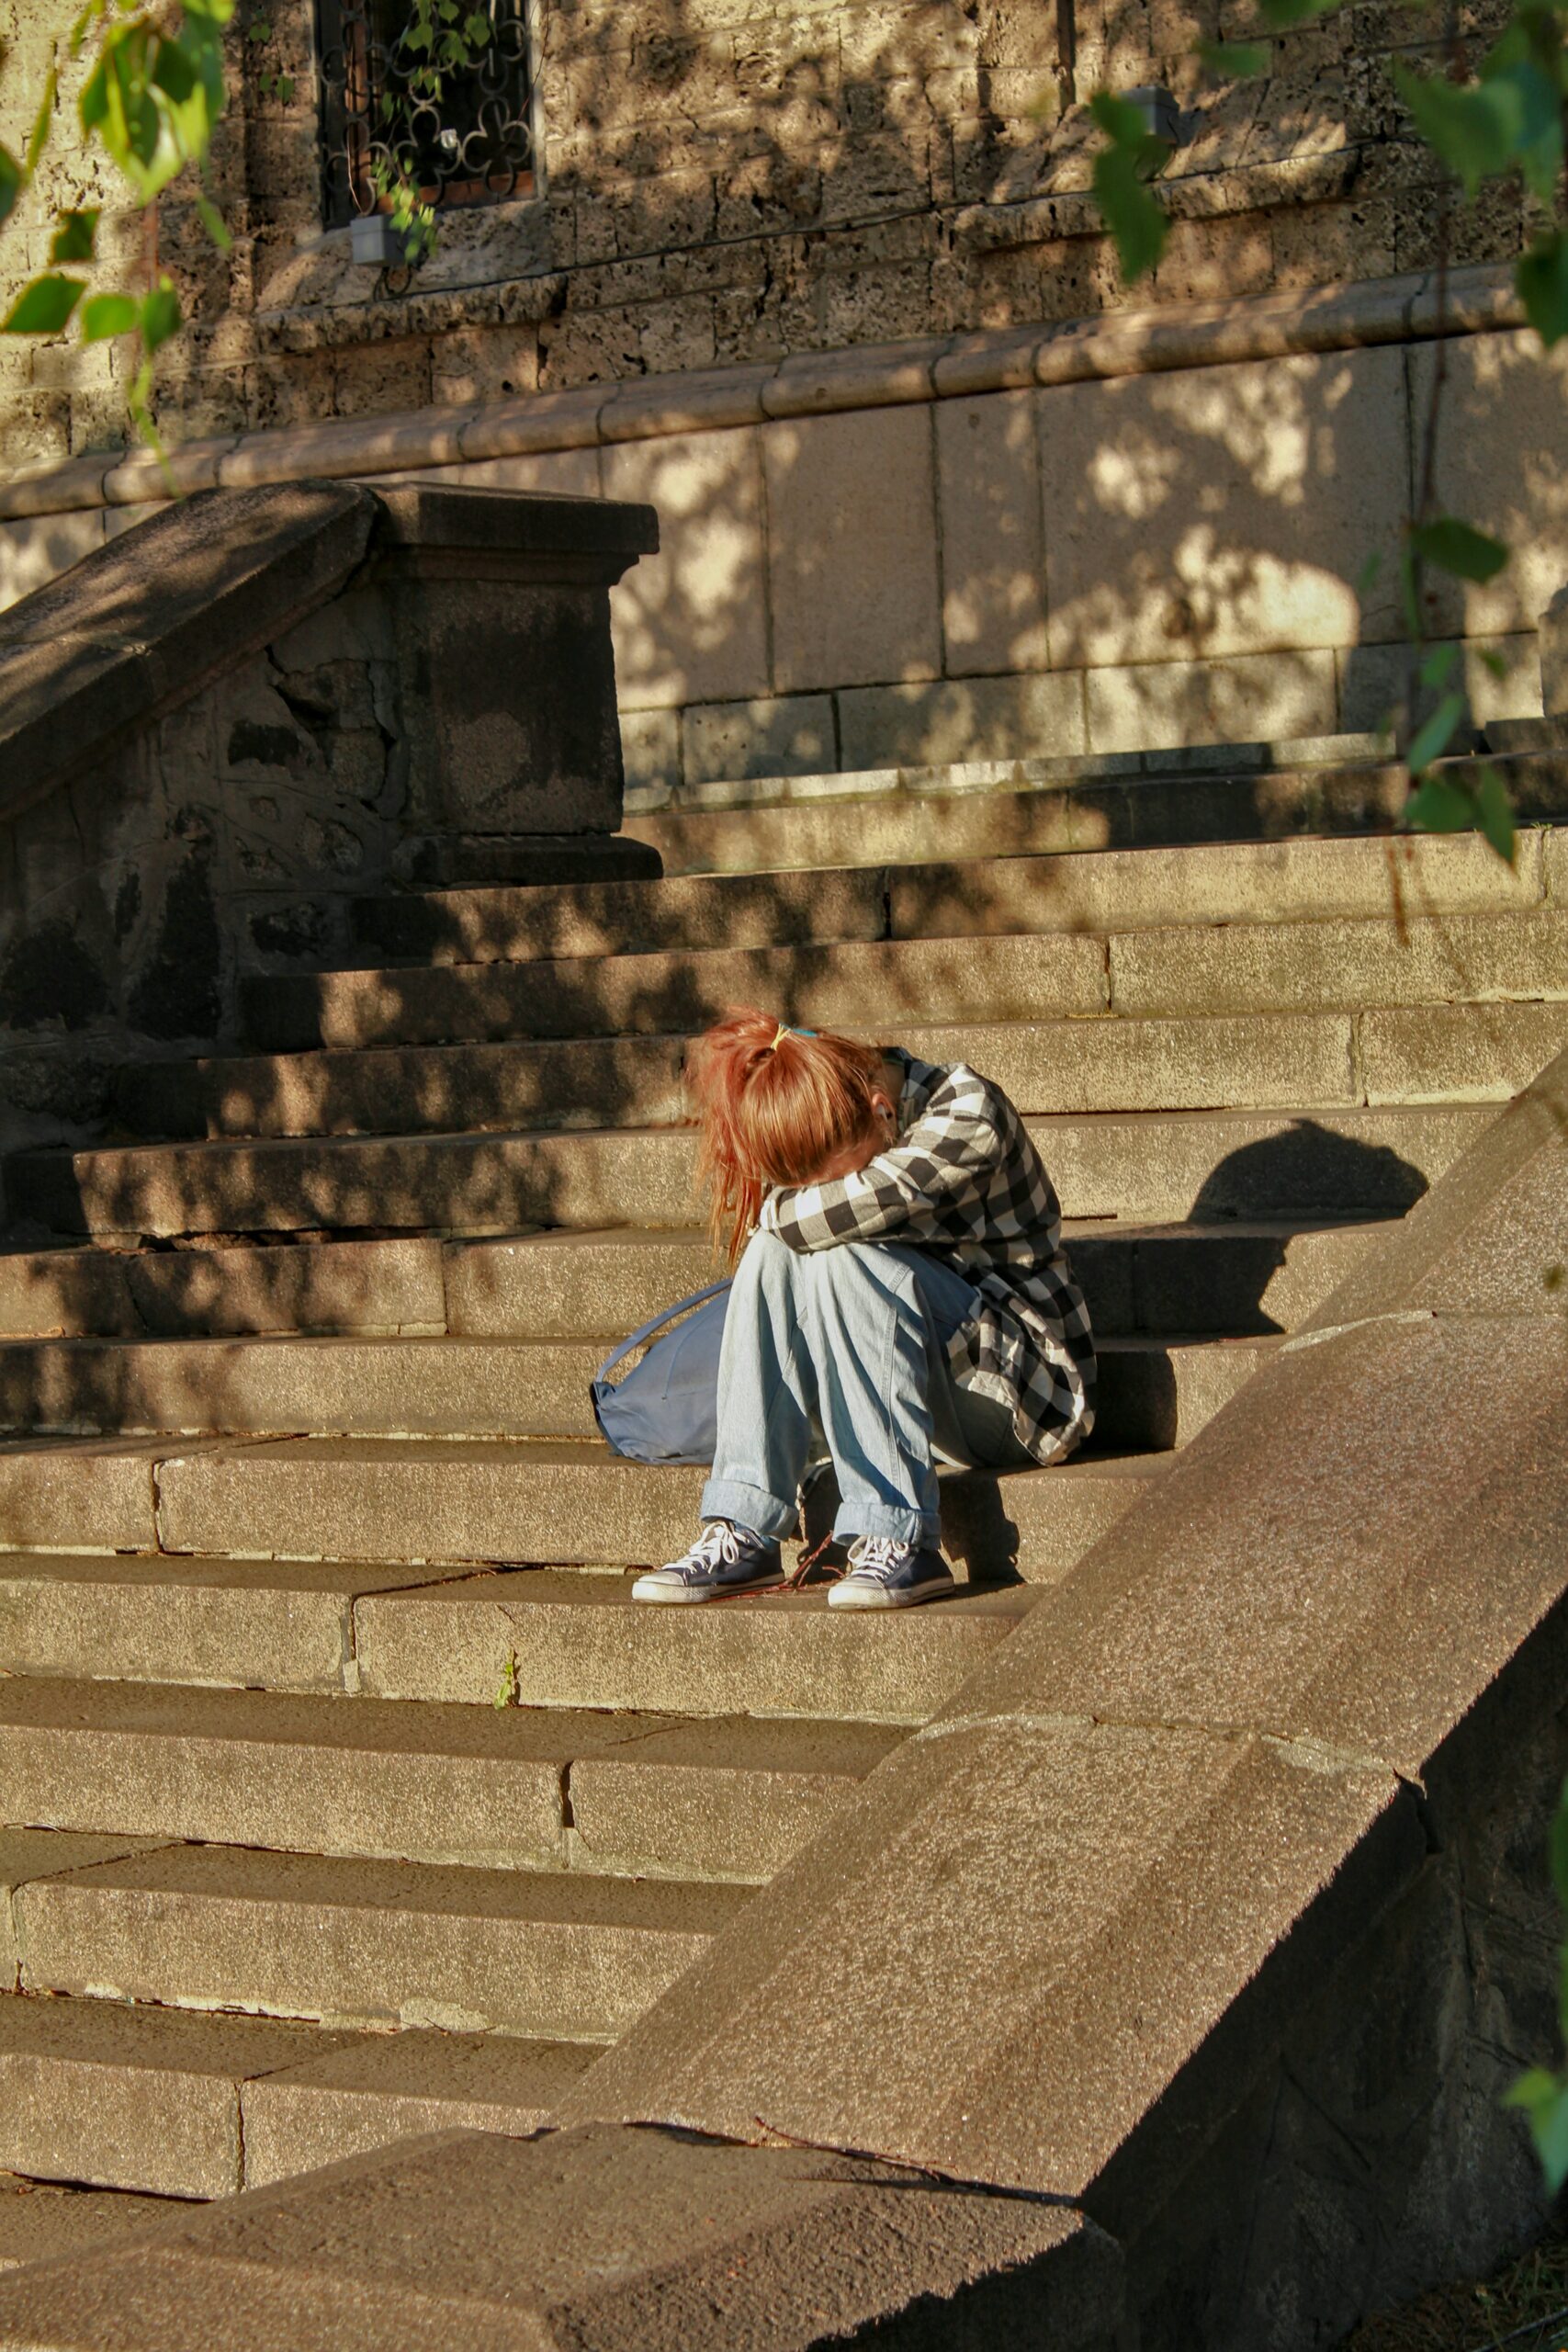 A teenage girl, symbolising the emotional impact of child emancipation laws in Australia, sits on the steps, her head bowed forward resting on her knees, in a contemplative and possibly troubled pose.